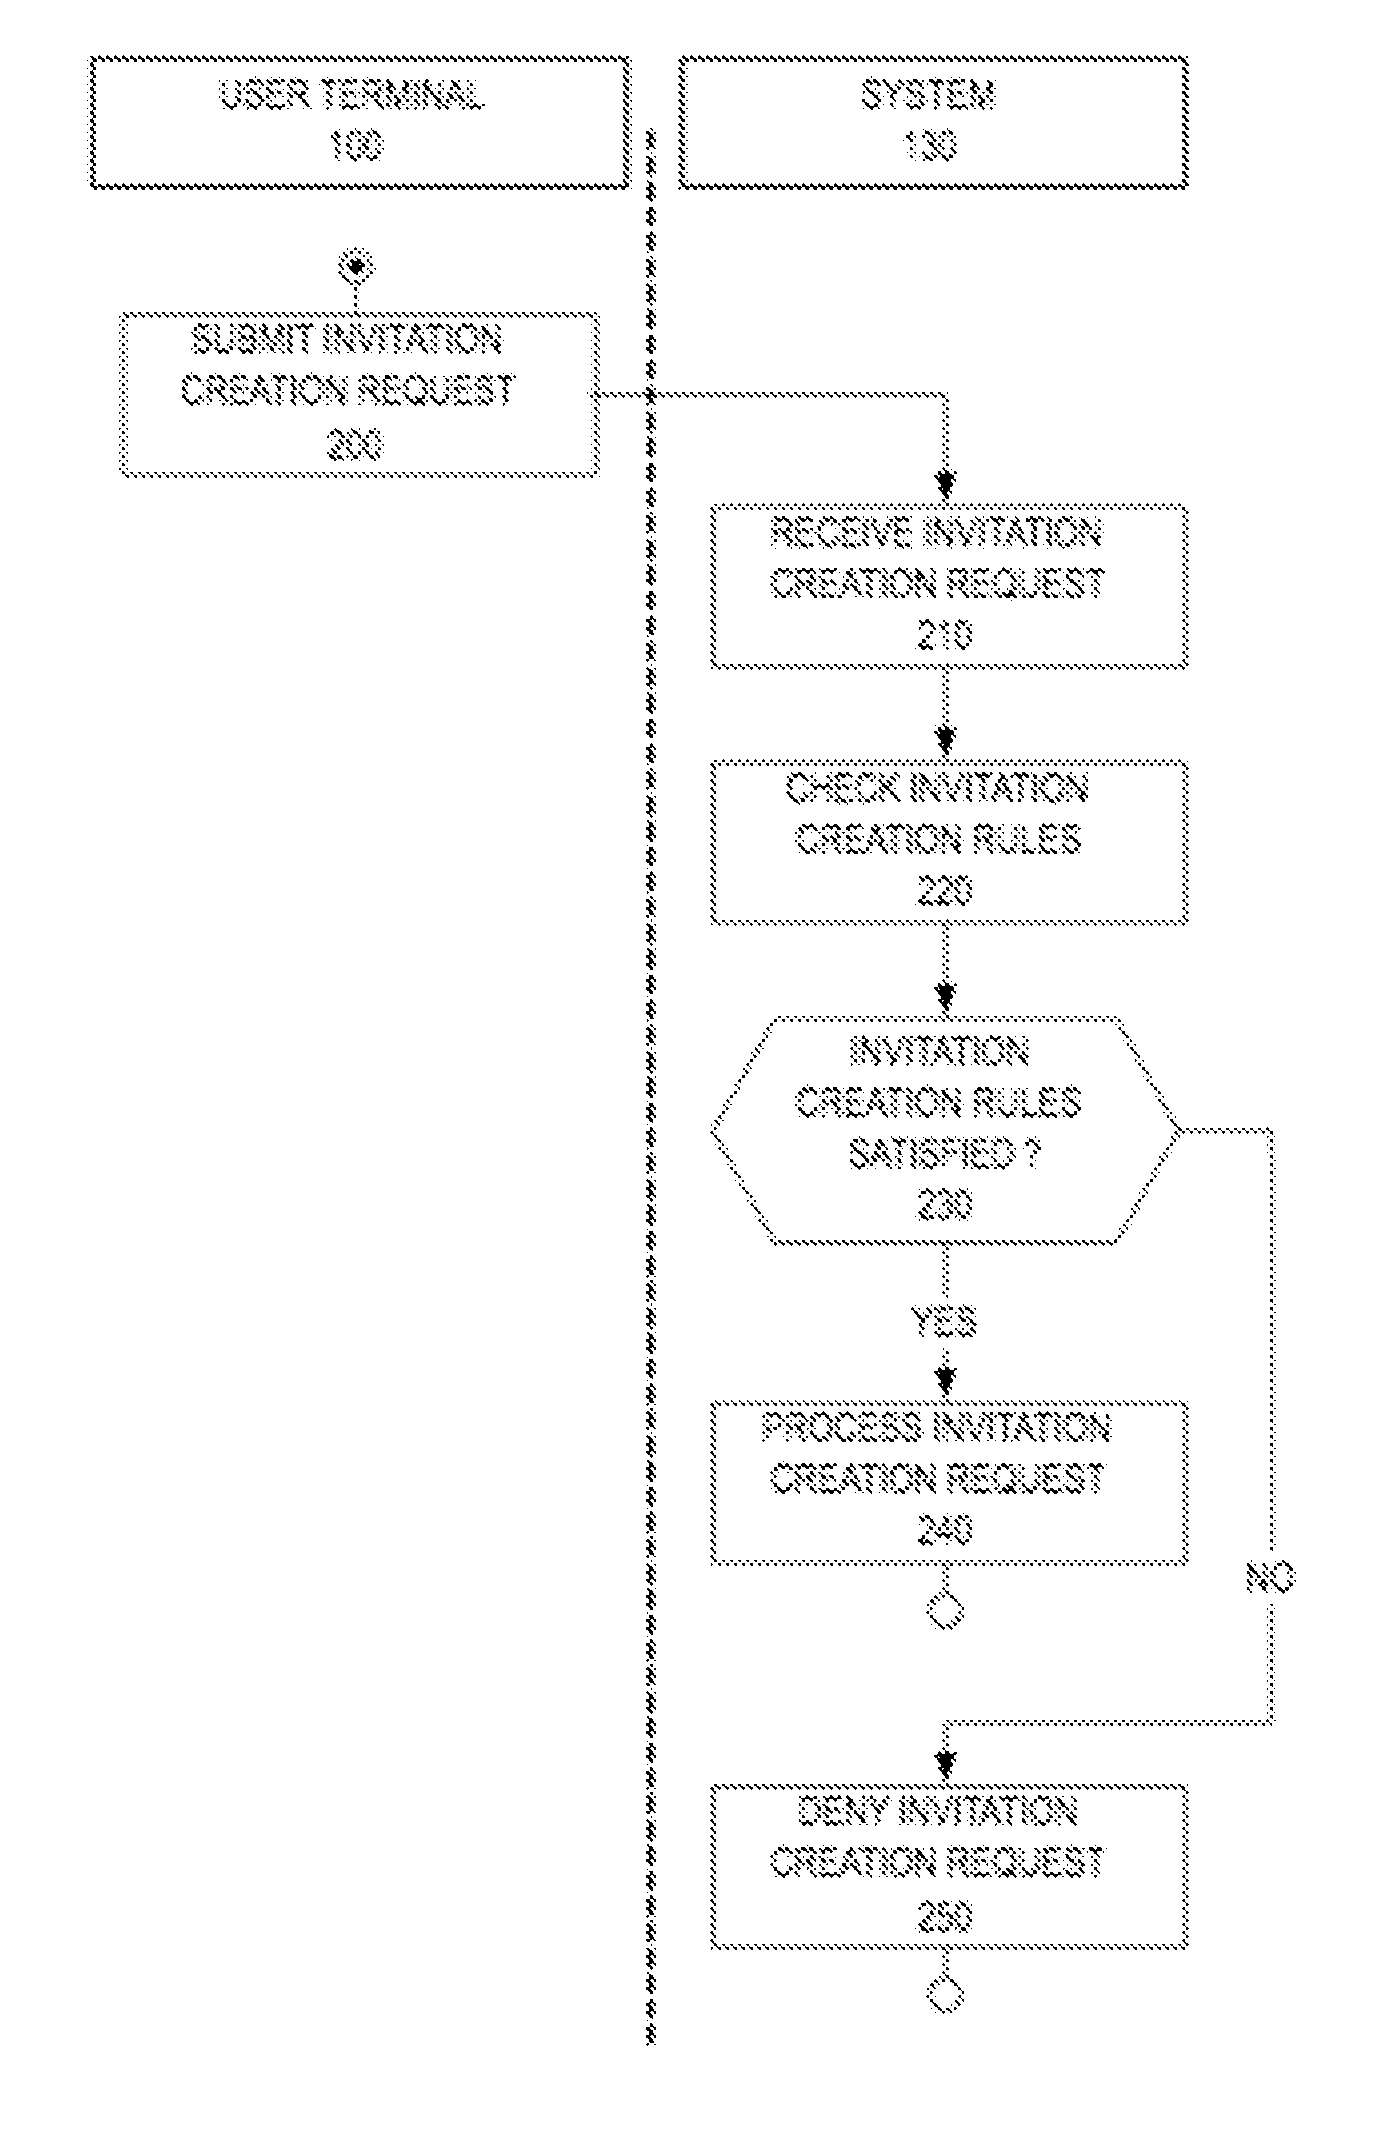 Computer-based Methods and Systems for Arranging Meetings Between Users and Methods and Systems for Verifying Background Information of Users